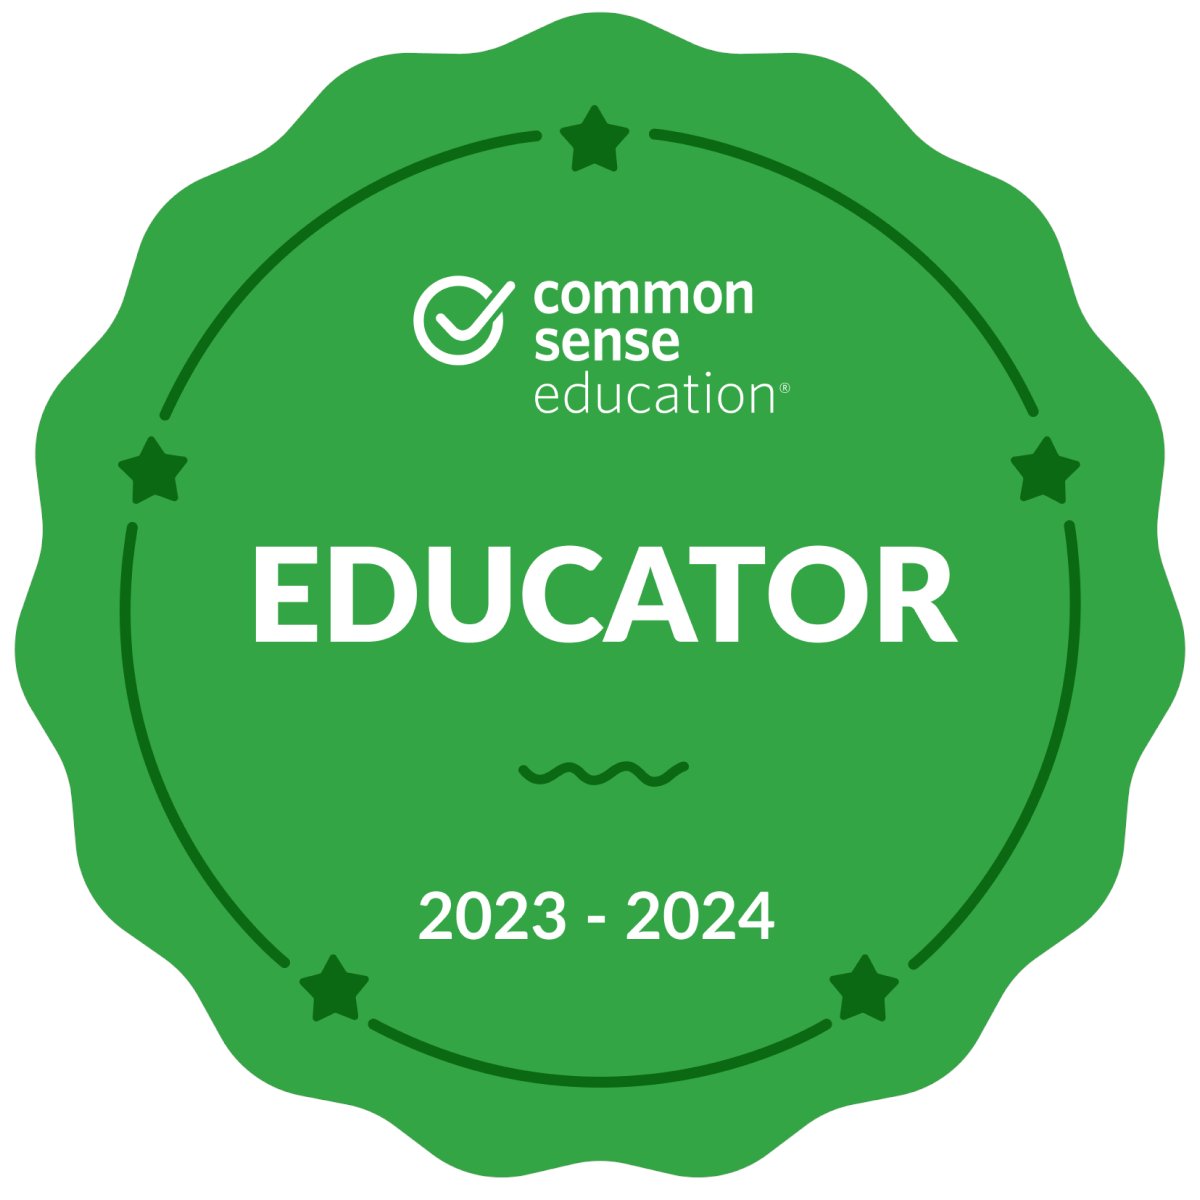 Completed the Training Course: Teaching Digital Citizenship from #CommonSenseEducator! Earn your Digital Citizenship badge and certificate for 2023-24 today!